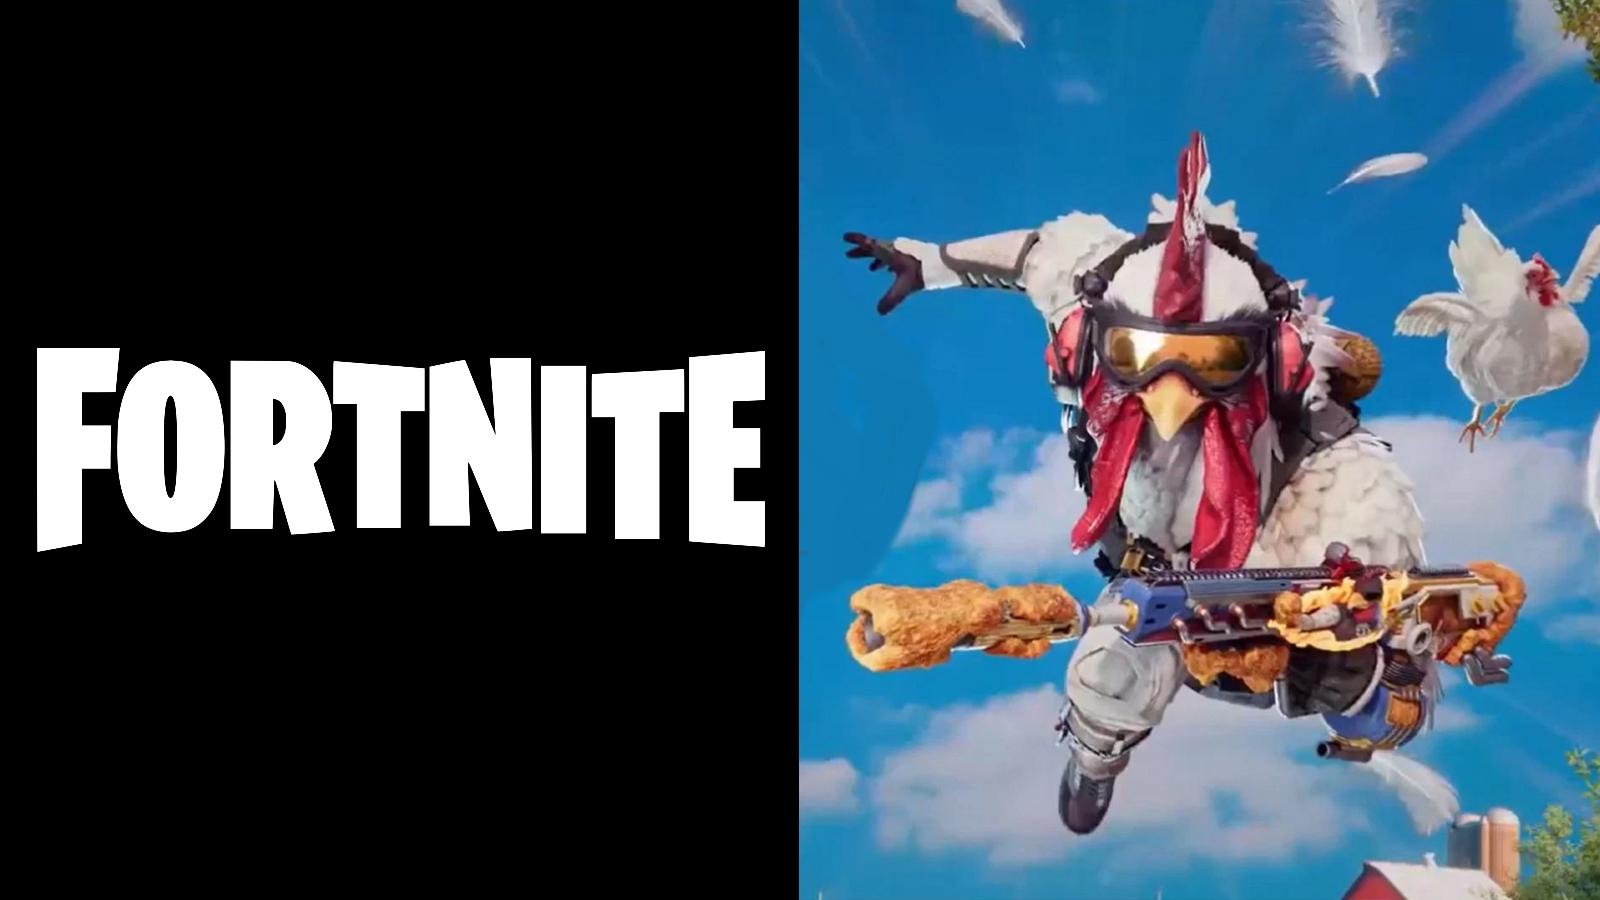 Fortnite logo on a black background next to an image of the Extra Crispy bundle in Warzone